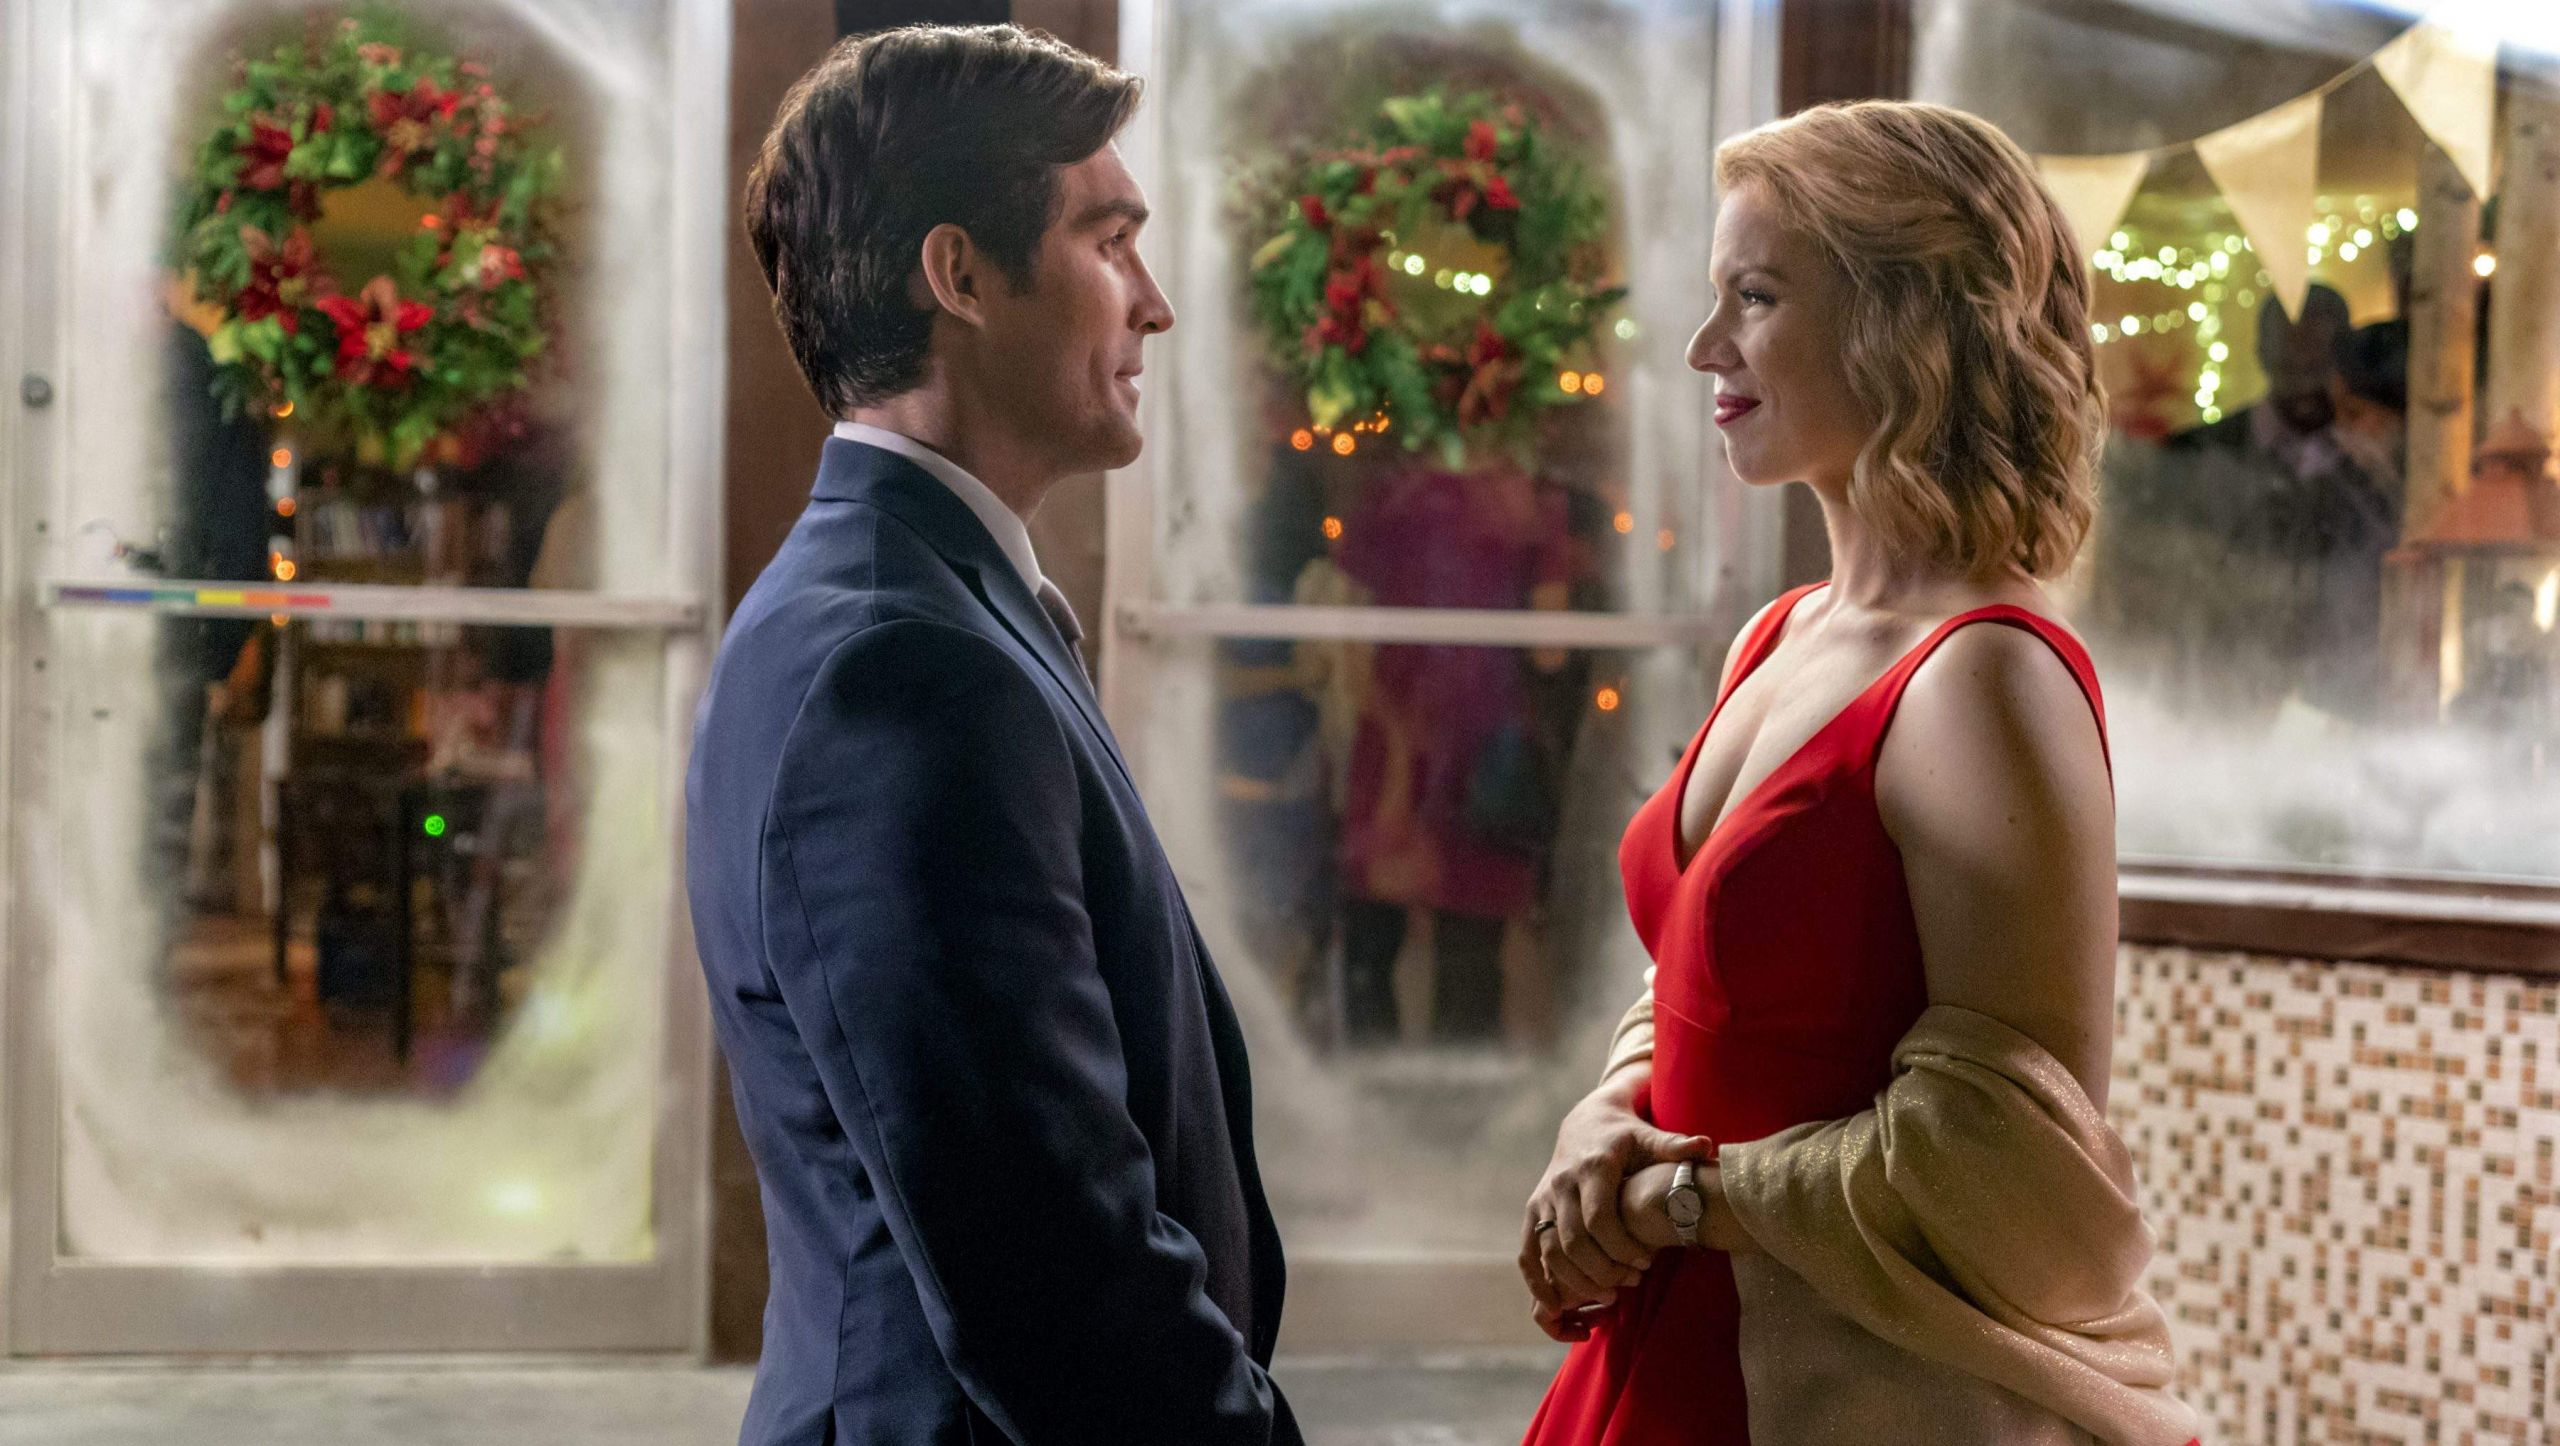 The Christmas Gift Cast
 Where Was Hallmark’s ‘A Gift to Remember’ ed